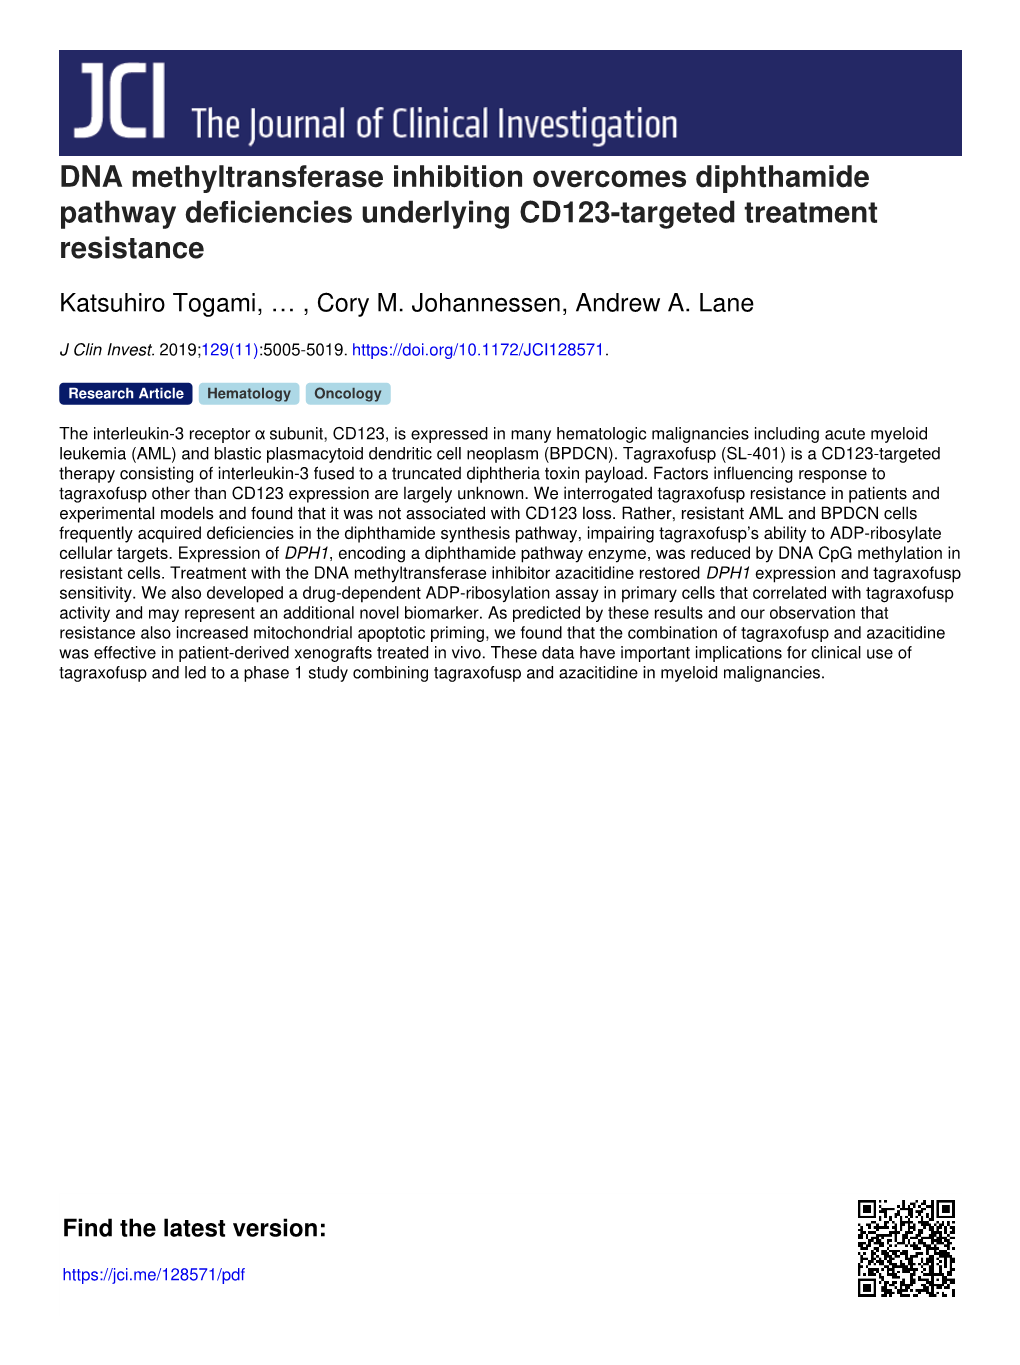 DNA Methyltransferase Inhibition Overcomes Diphthamide Pathway Deficiencies Underlying CD123-Targeted Treatment Resistance